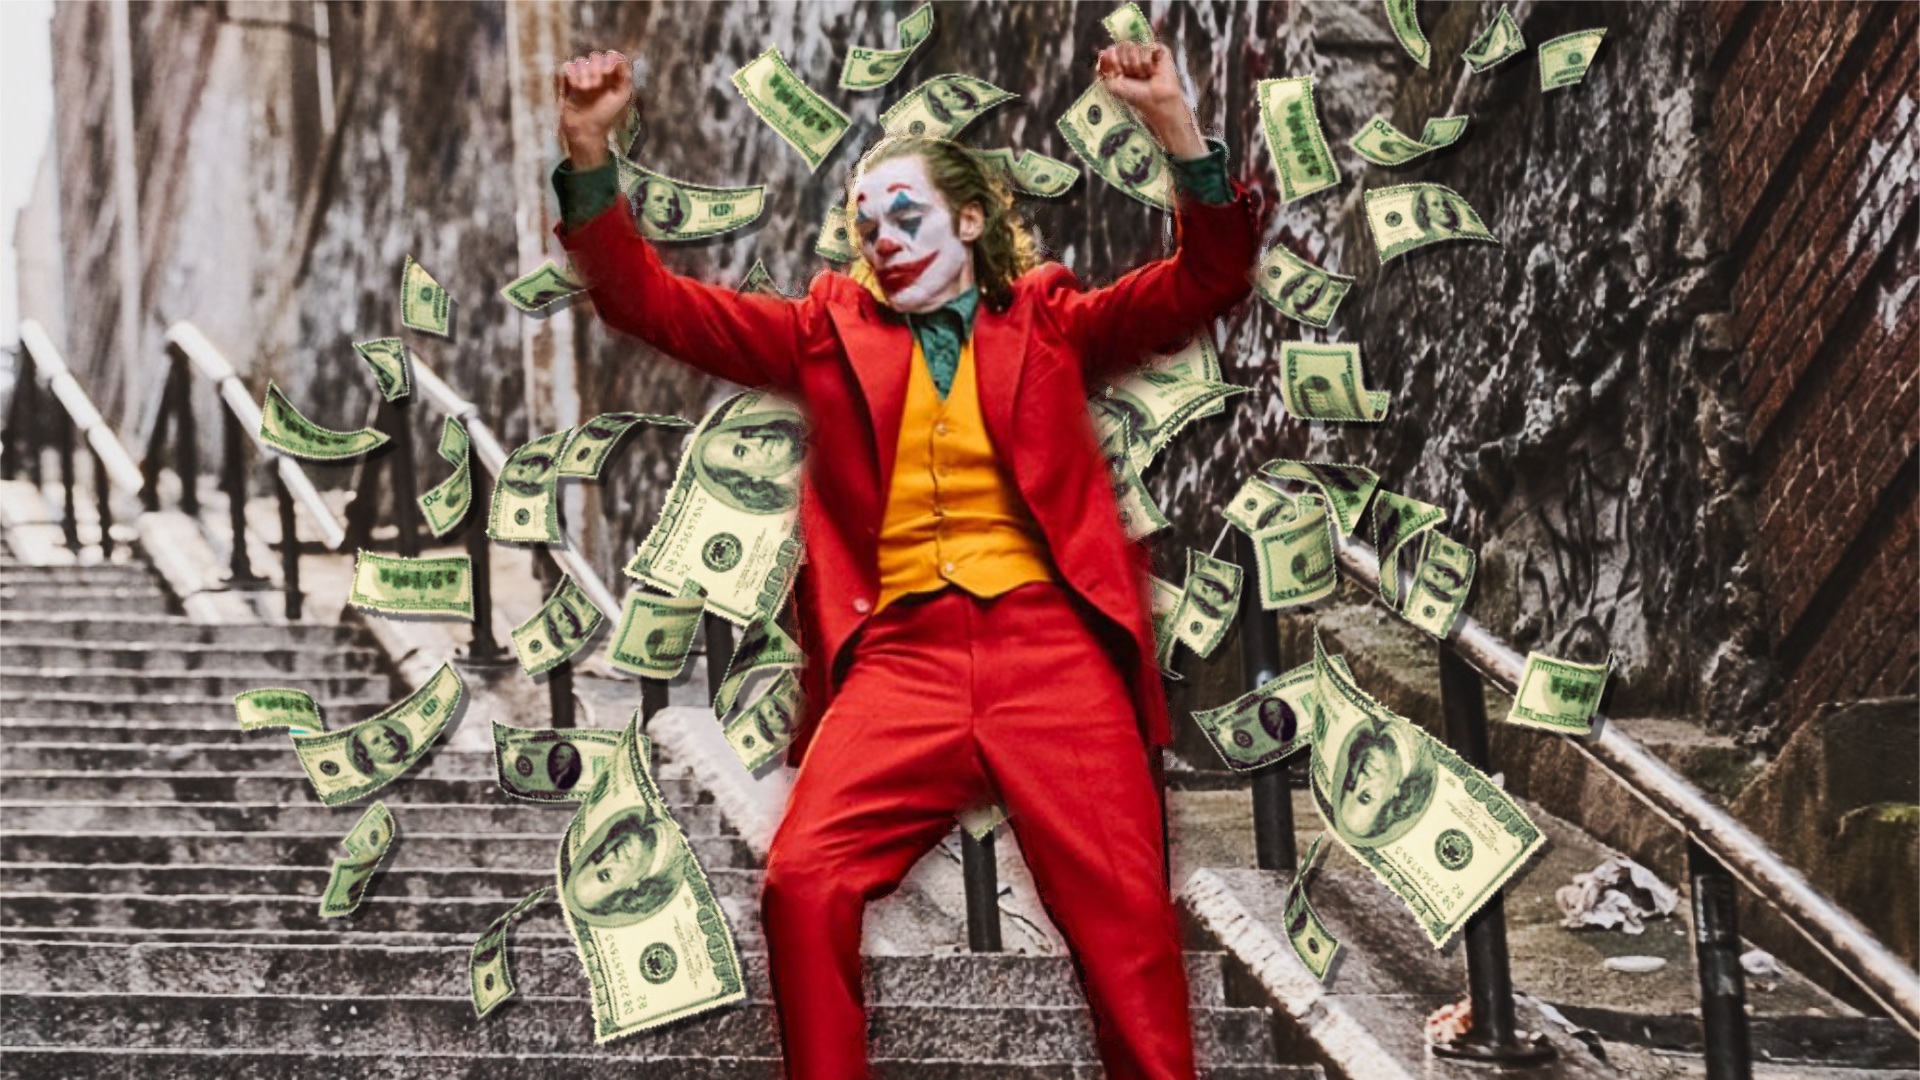 'Joker' On Its Way to Becoming the Highest Grossing R-Rated Film of All Time